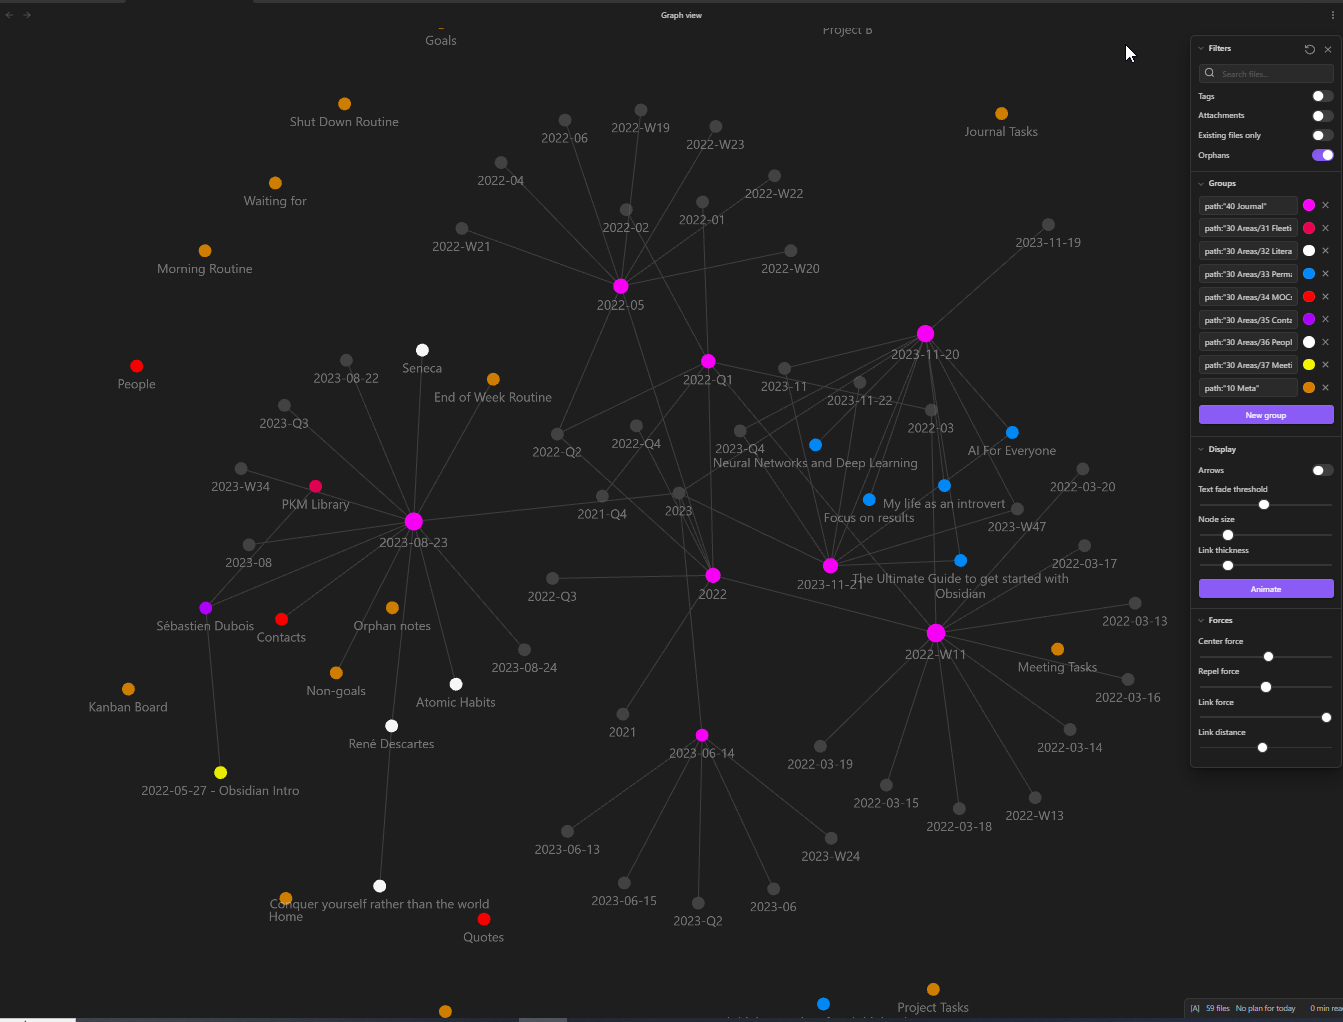 The Global Graph view